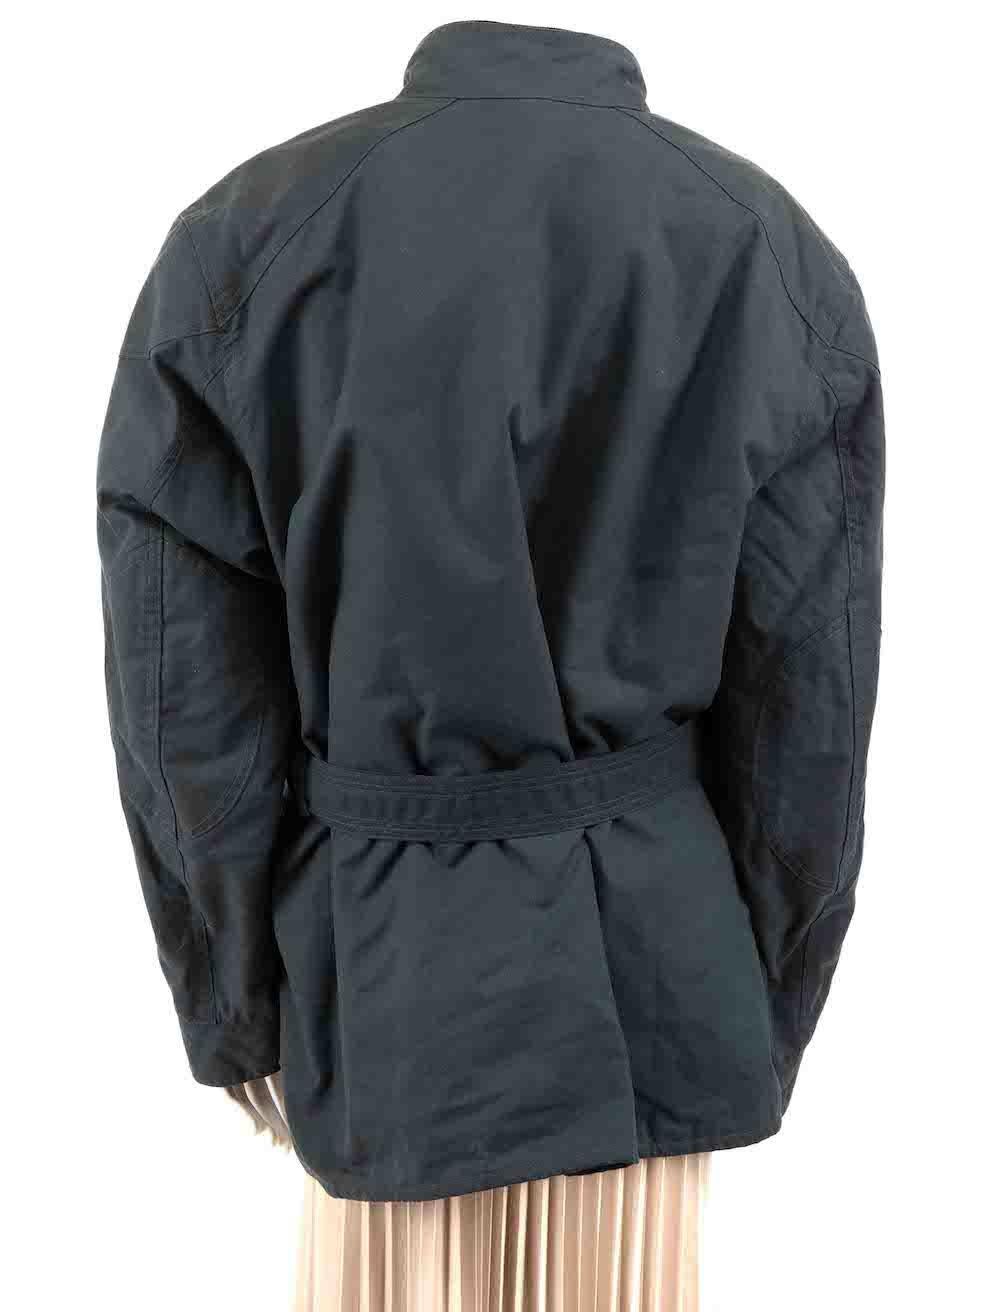 Belstaff Navy Detachable Faux Fur Lined Parka Coat Size XXL In Good Condition For Sale In London, GB